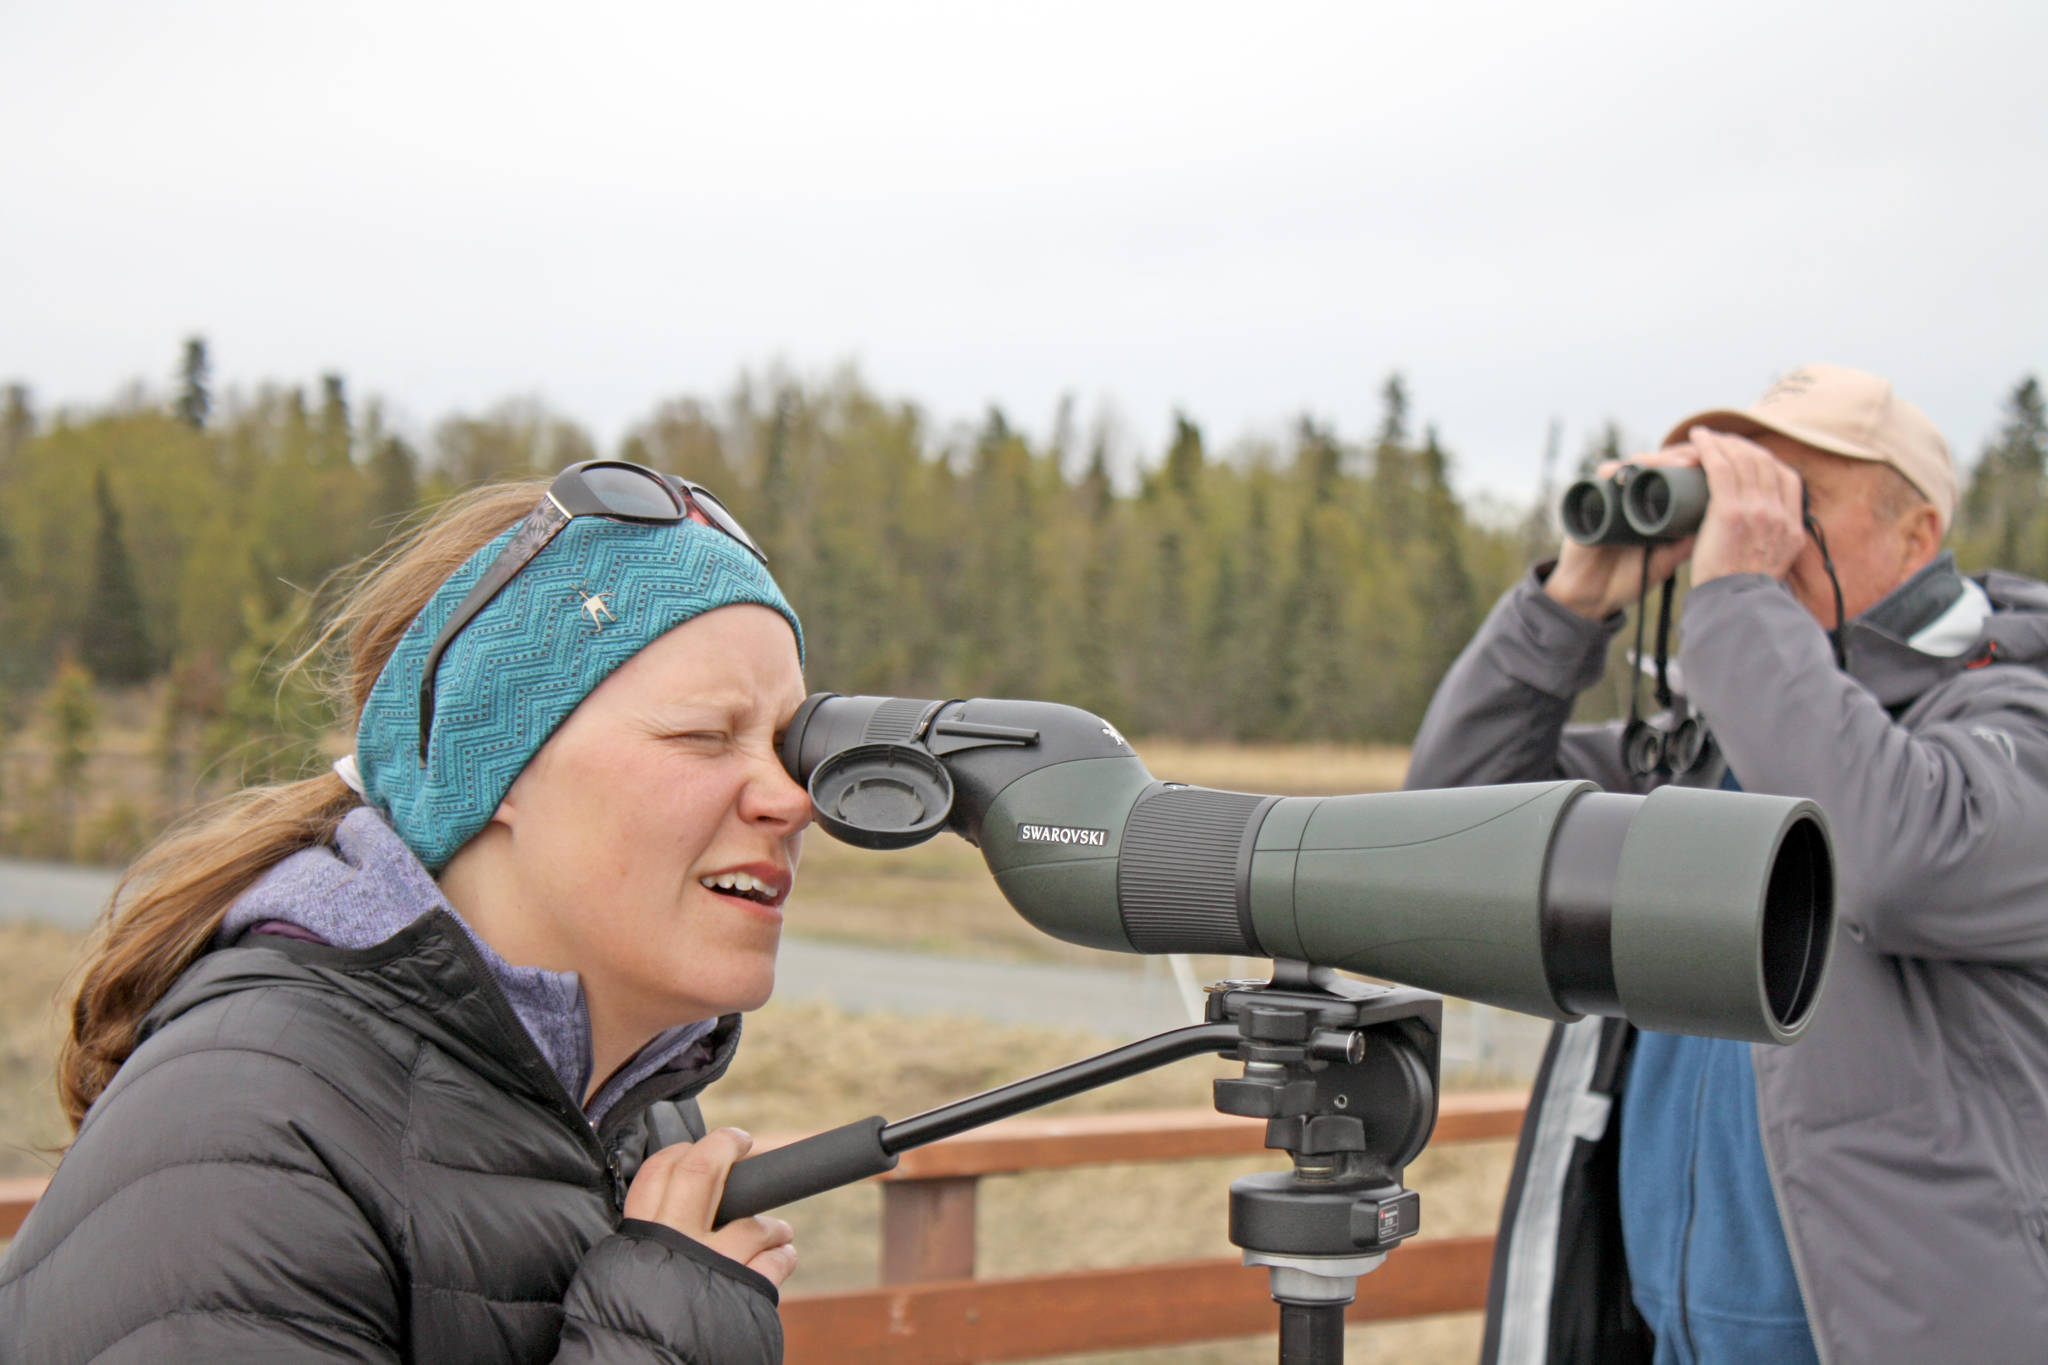 University of Alaska Anchorage student Julie Polasik peers over the Kenai flats through a birding scope during the 24-Hour Midnight Sun Big Sit on Saturday, May 19. Dozens of volunteer bird watchers turned out to the Kenai Wildlife Viewing Platform for the sit, which aimed to tally the dozens of species of birds coming and going from the estuary. Data gathered by bird watchers will be posted to the Cornell Lab of Ornithology eBird website, which collects data on bird species around the world. Organized by the Keen Eye Bird Club, the event was part of the Kenai Birding Festival, which took place over the weekend and offered guided hikes, float trips, trail walks, workshops and educational talks. (Photo by Erin Thompson/Peninsula Clarion)